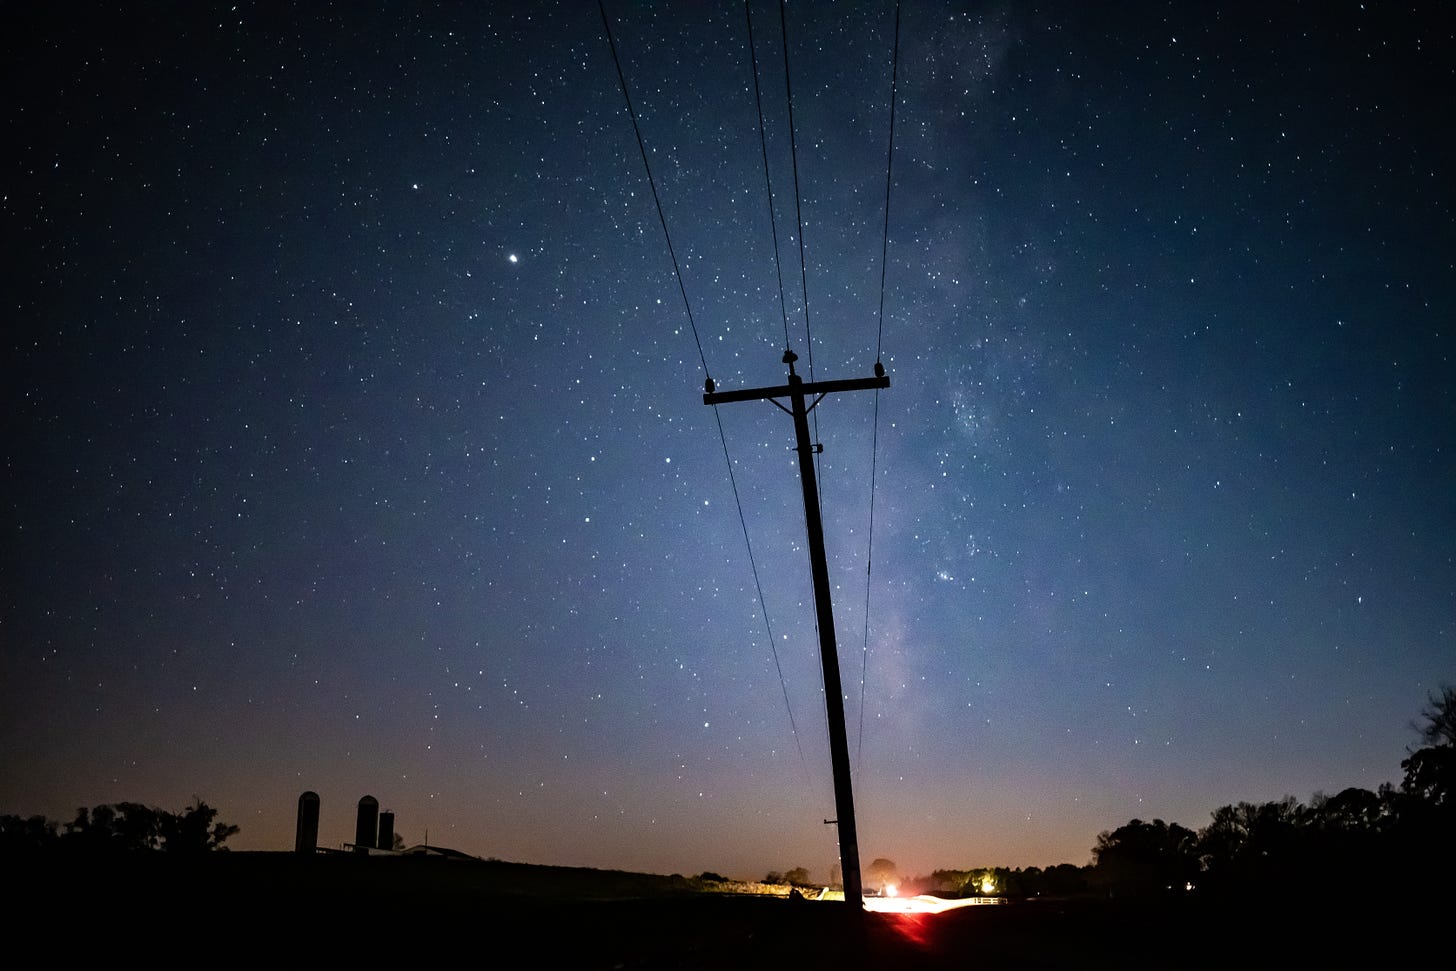 A photograph of a telephone pole and lines silhouetted against a dark, starry sky. The pole stretches vertically up through the center of the frame, following the path of the Milky Way.